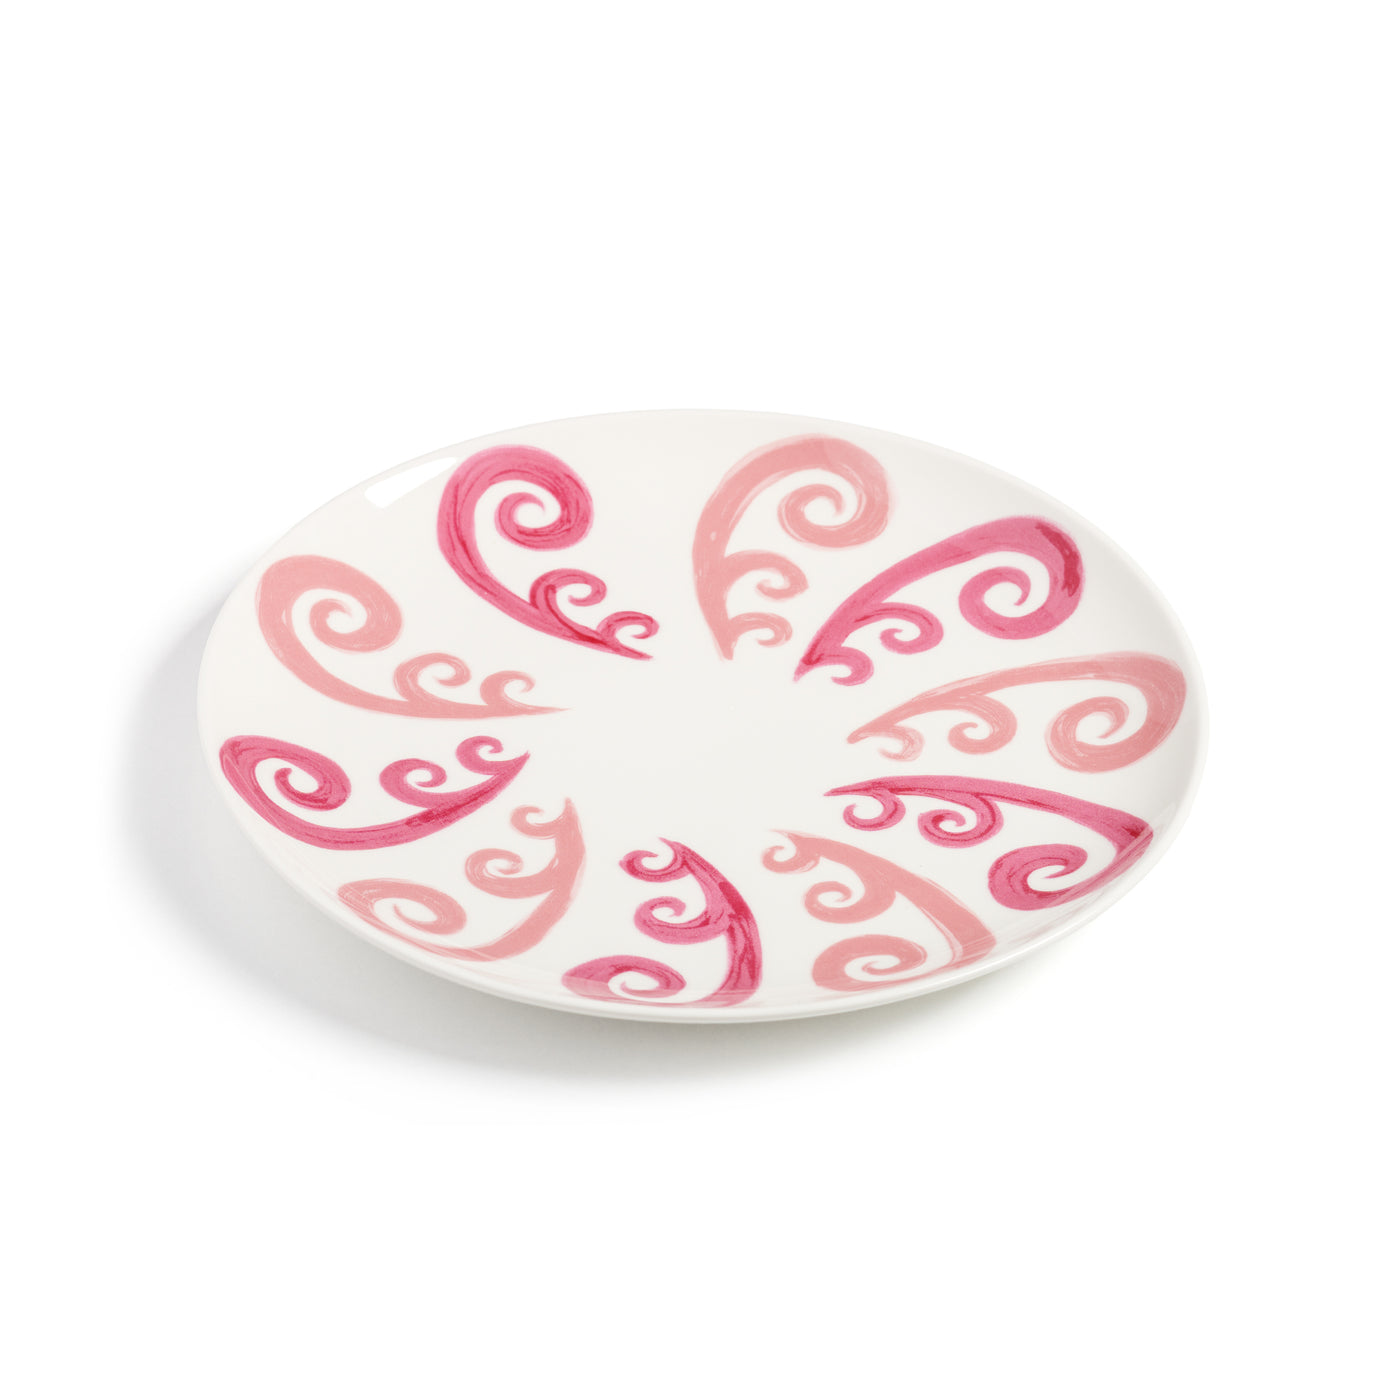 Peacock Dinner Plate in Two Tone Pink